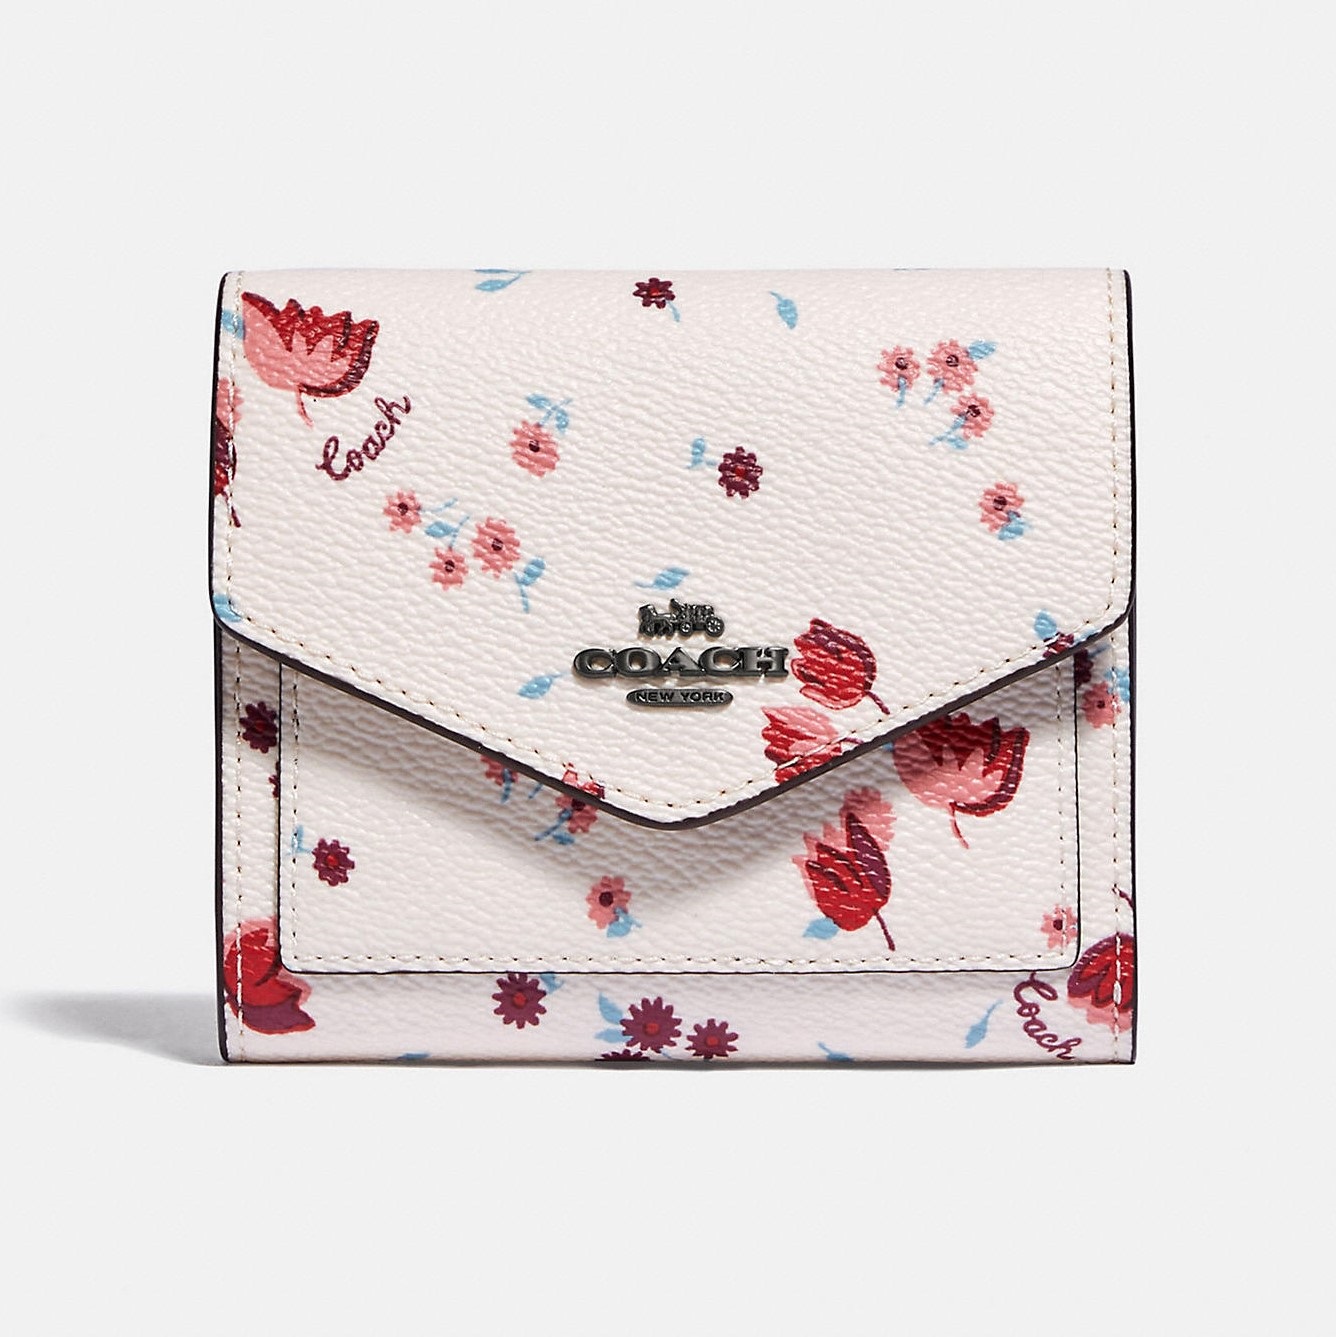 VÍ COACH MINI NỮ SMALL WALLET WITH TULIP MEADOW PRINT 5